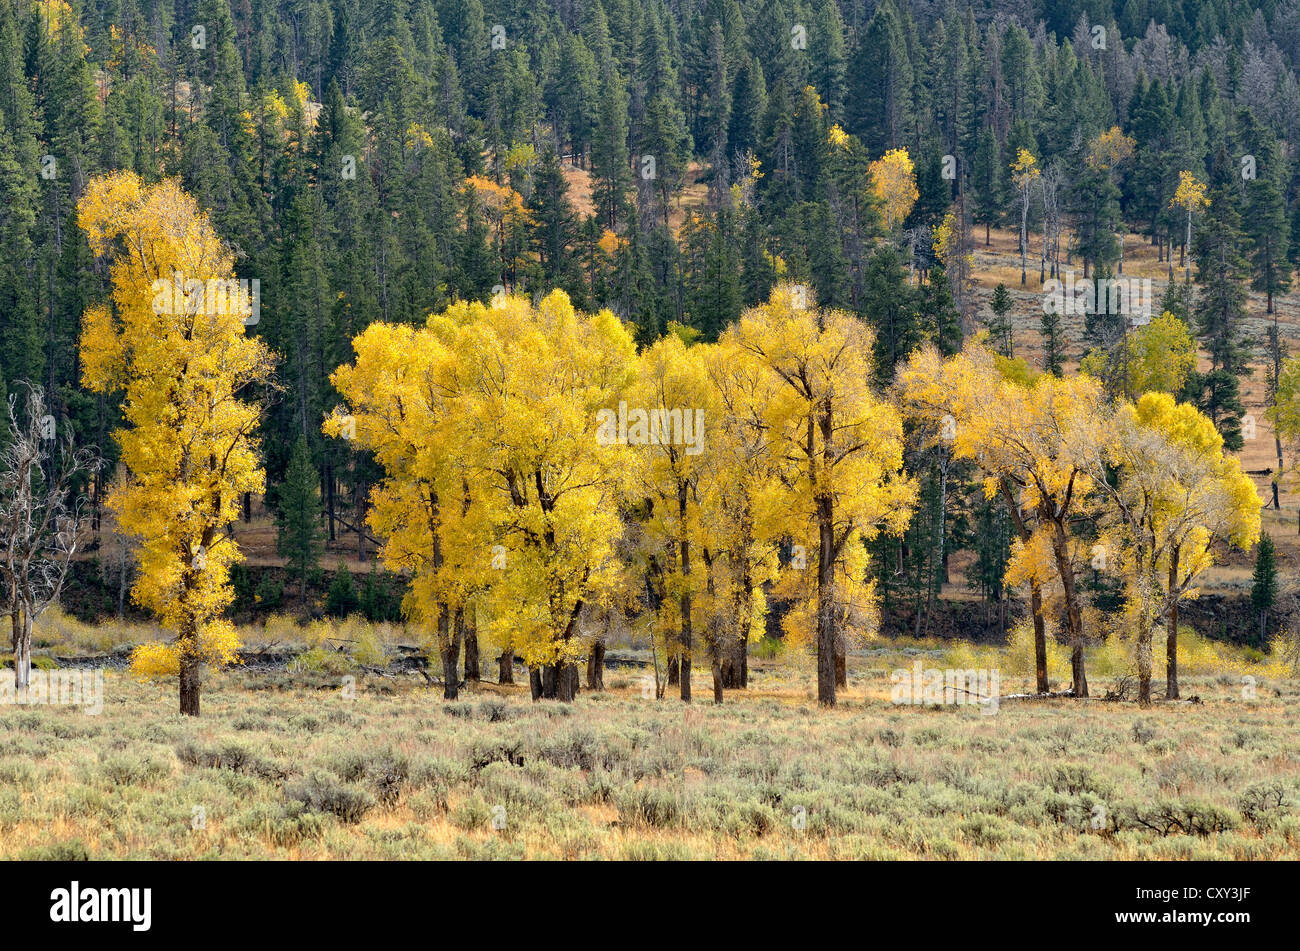 Autumn colored aspen trees and poplar trees (Populus sp.), Lamar Valley, Yellowstone National Park, Wyoming, USA Stock Photo